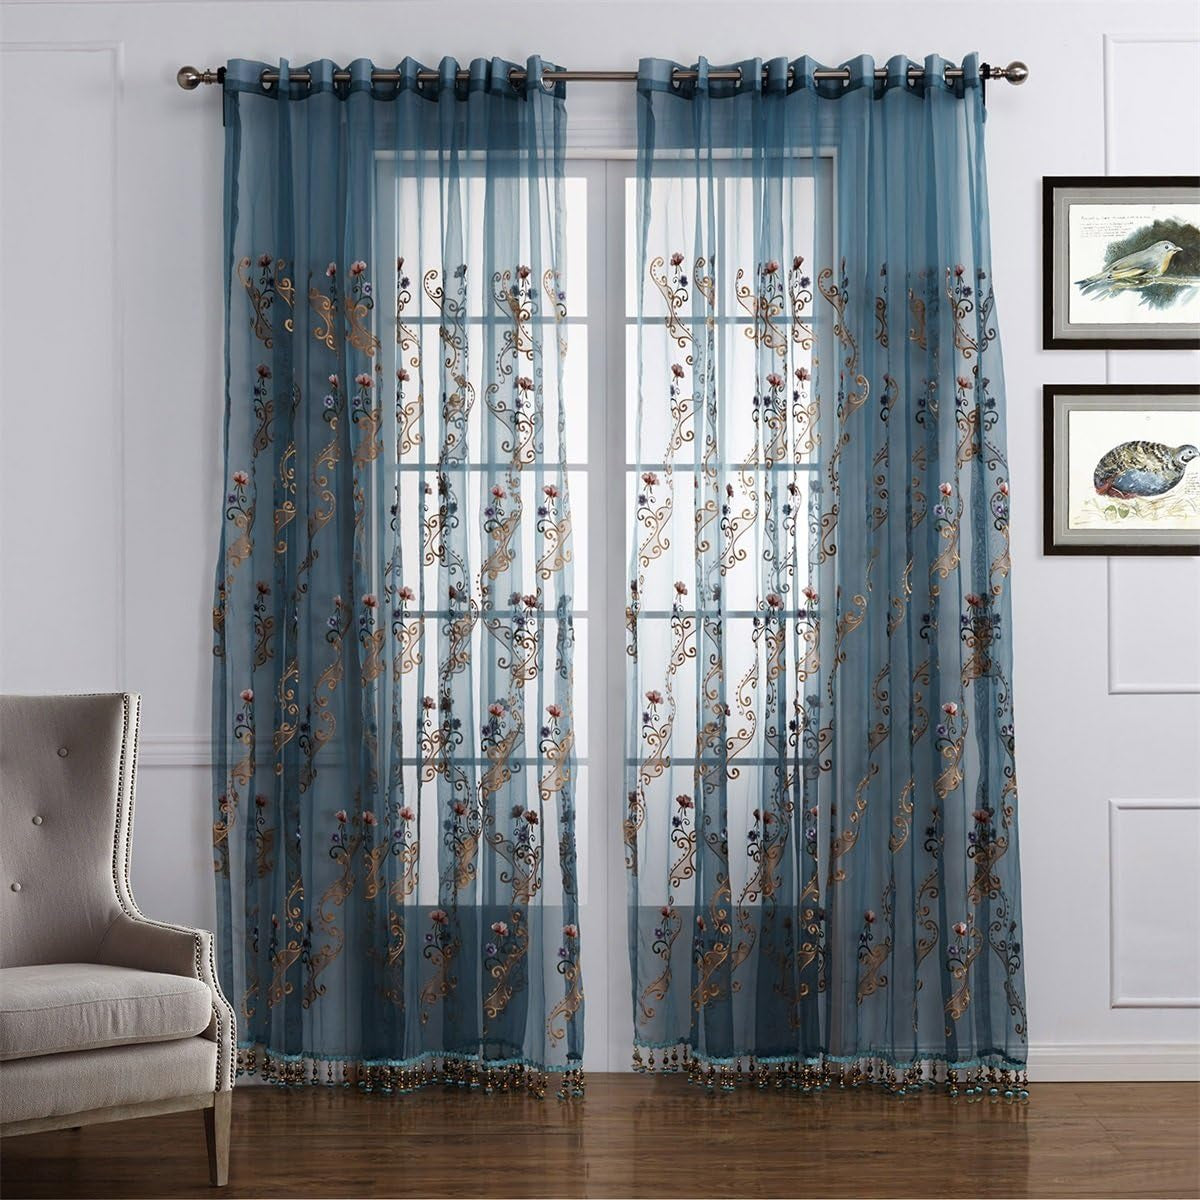 Dreaming Casa Ivory Curtains 96 Inches Long Sheer Curtains Pinch Pleated Curtains 52" W X 96" L  Dreaming Casa Blue Floral Embroidery 1 X (52"W X 84"L) 